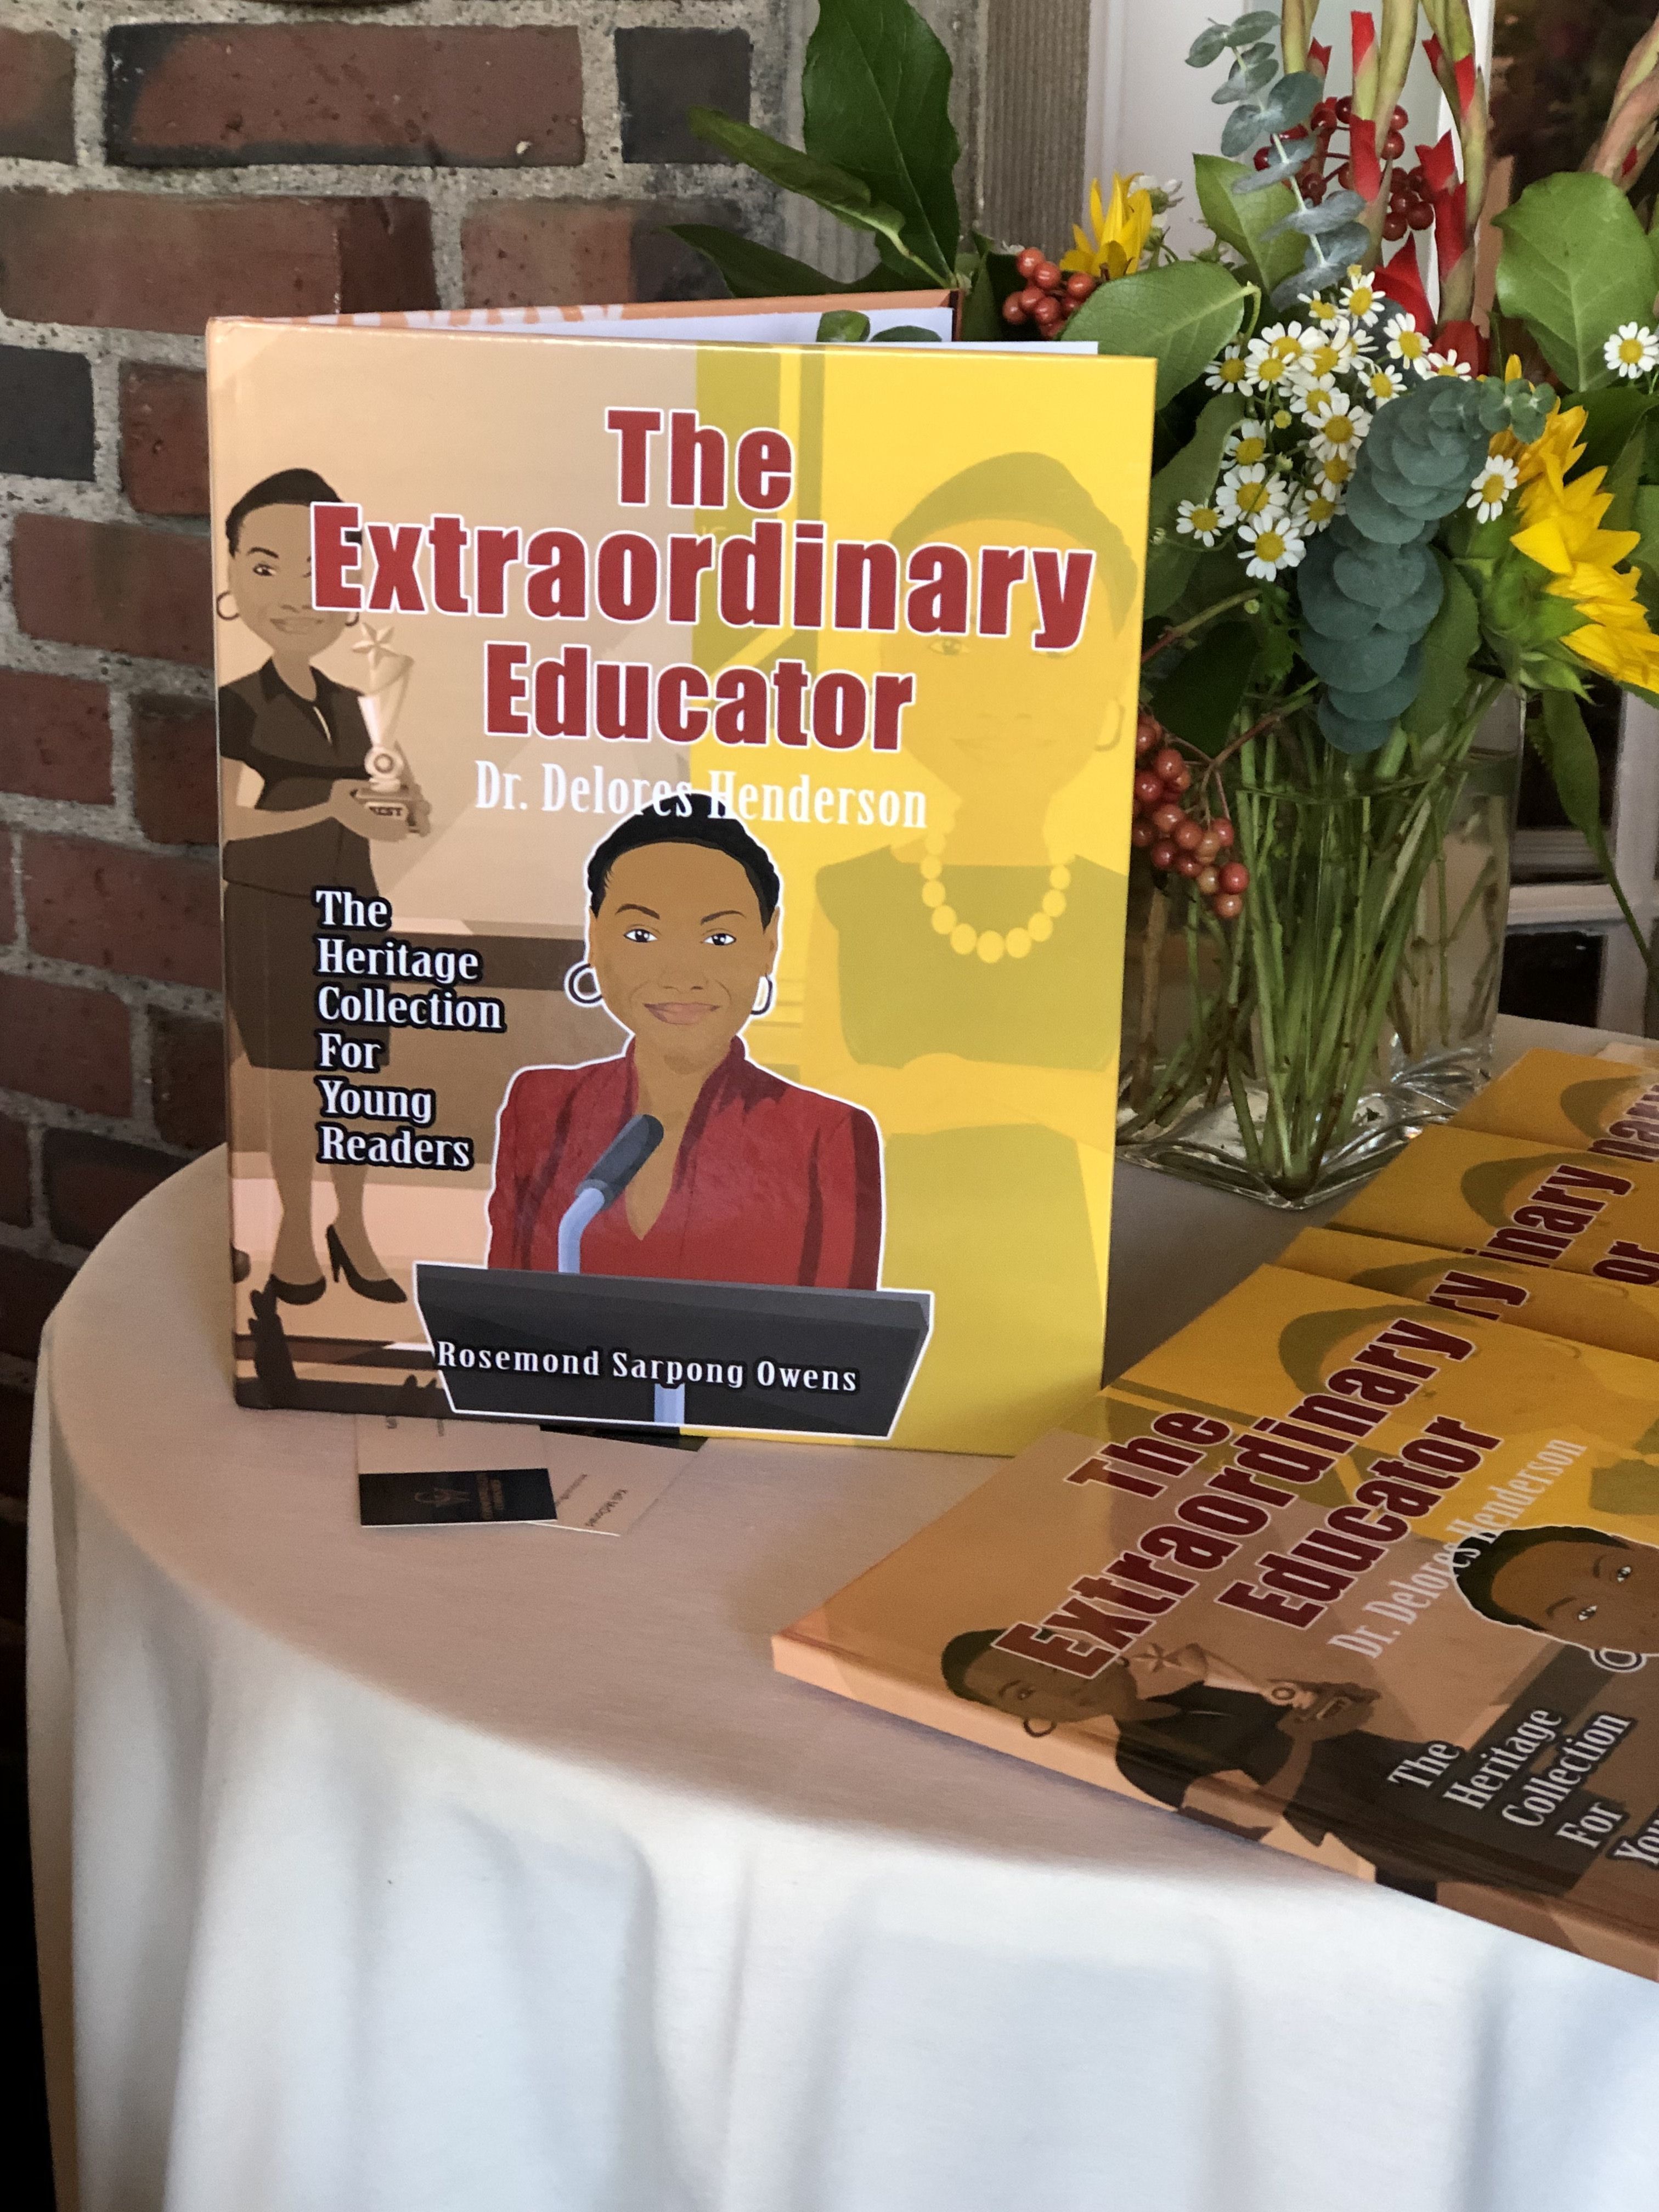 The Extraordinary Educator is a Fantastic Book!